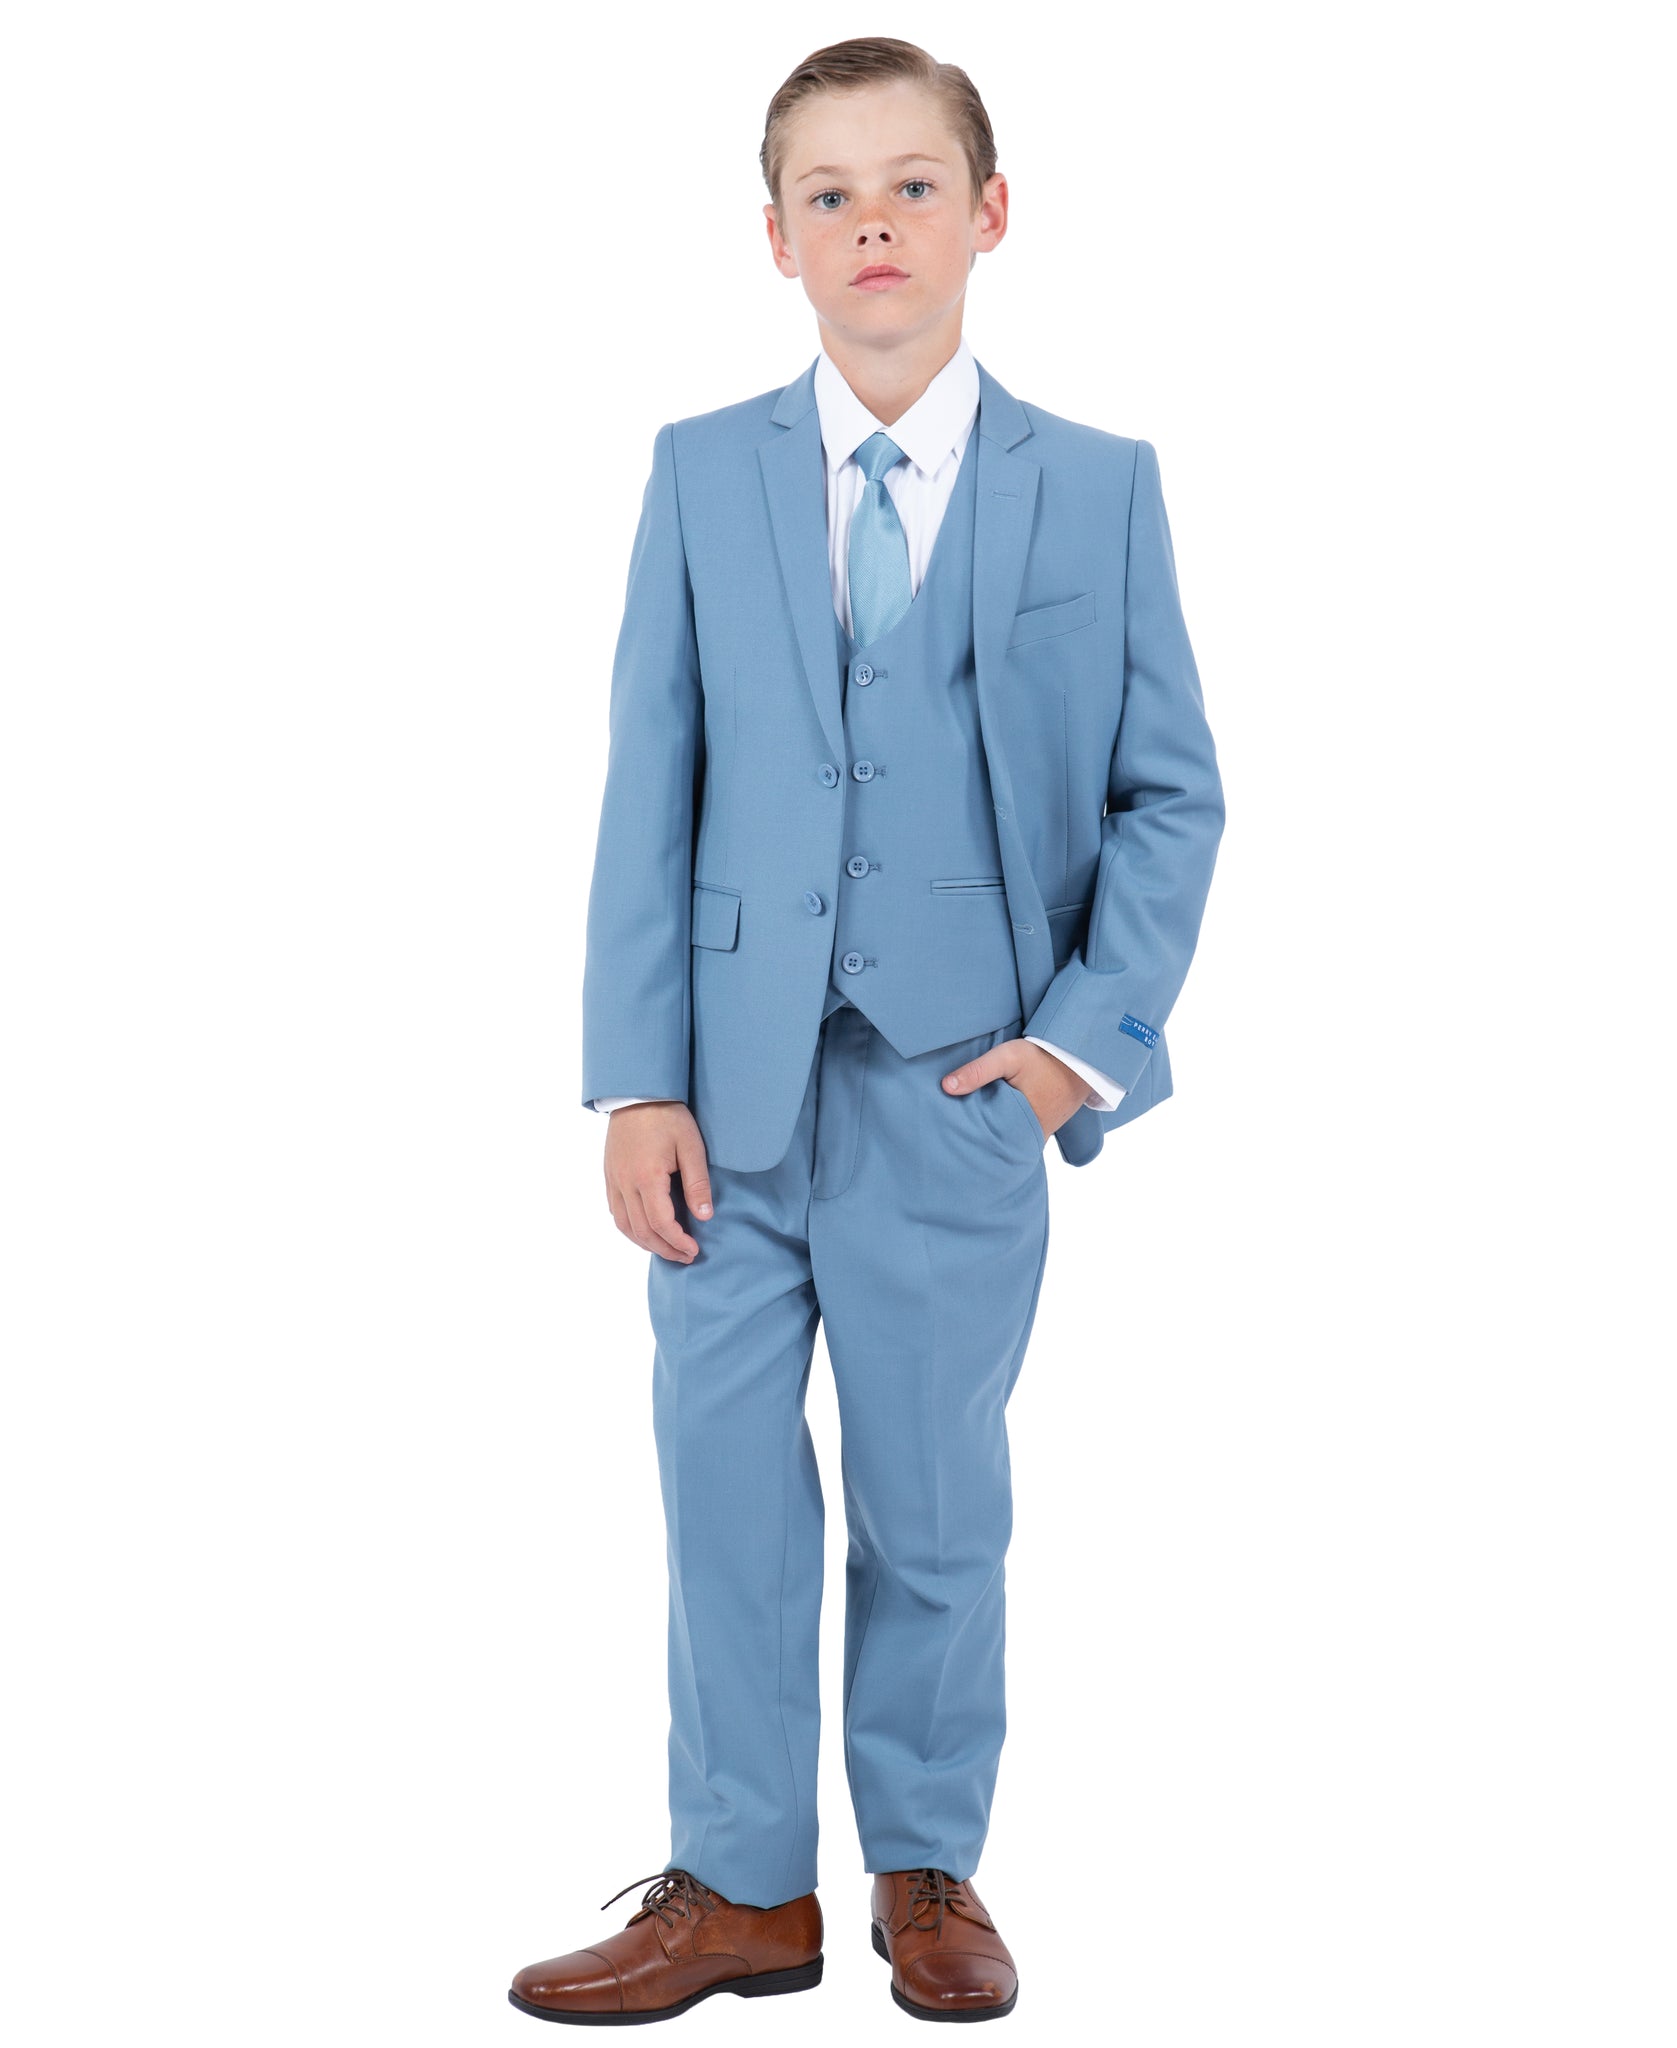 Perry Ellis Boys 5 PC Solid Suits